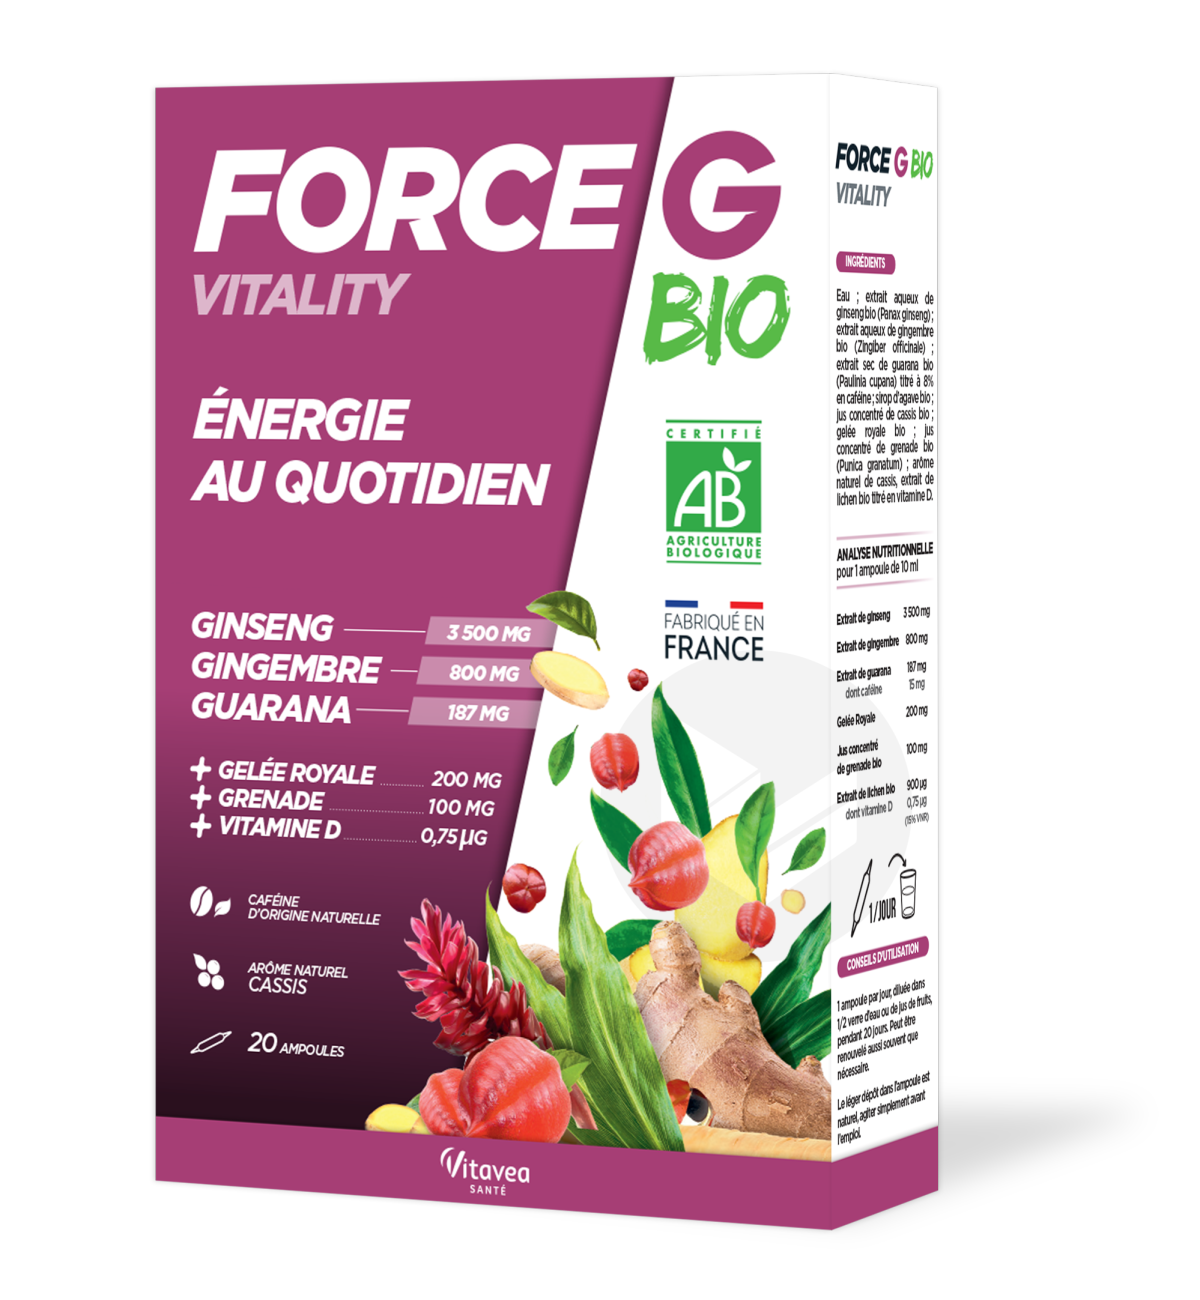 Force G Vitality bio 20 ampoules